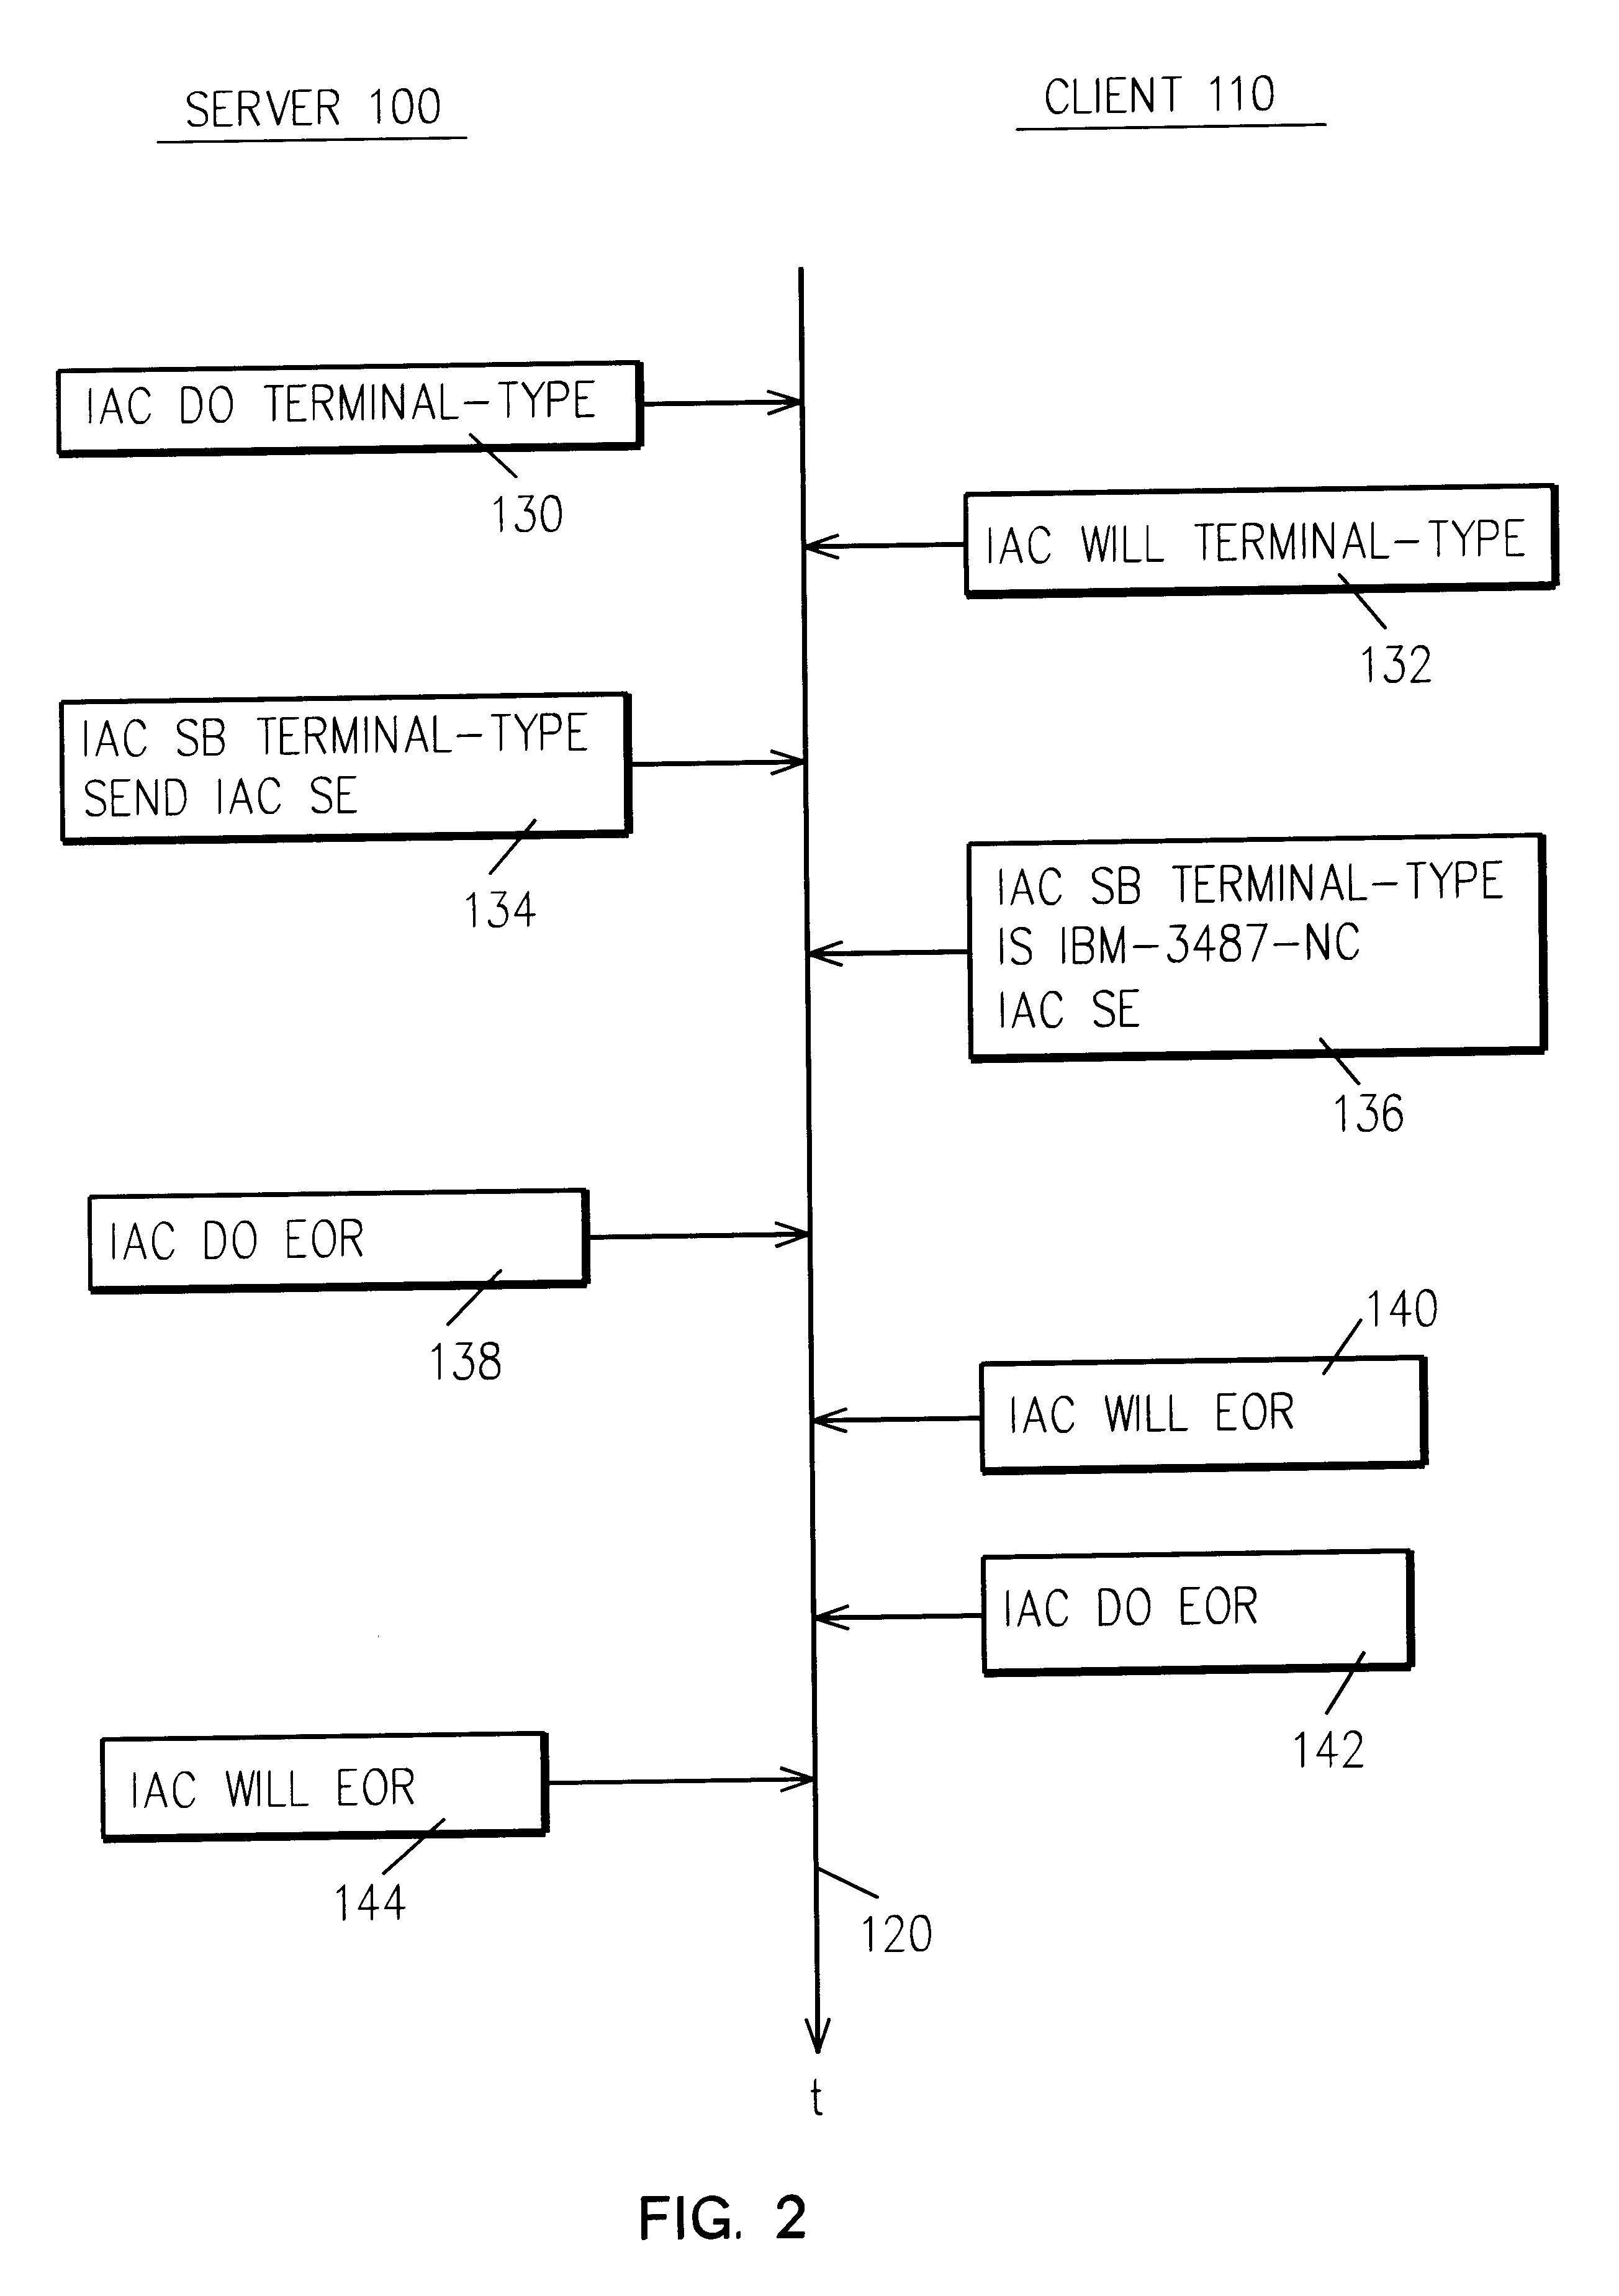 System and method for building and exchanging encrypted passwords between a client and server